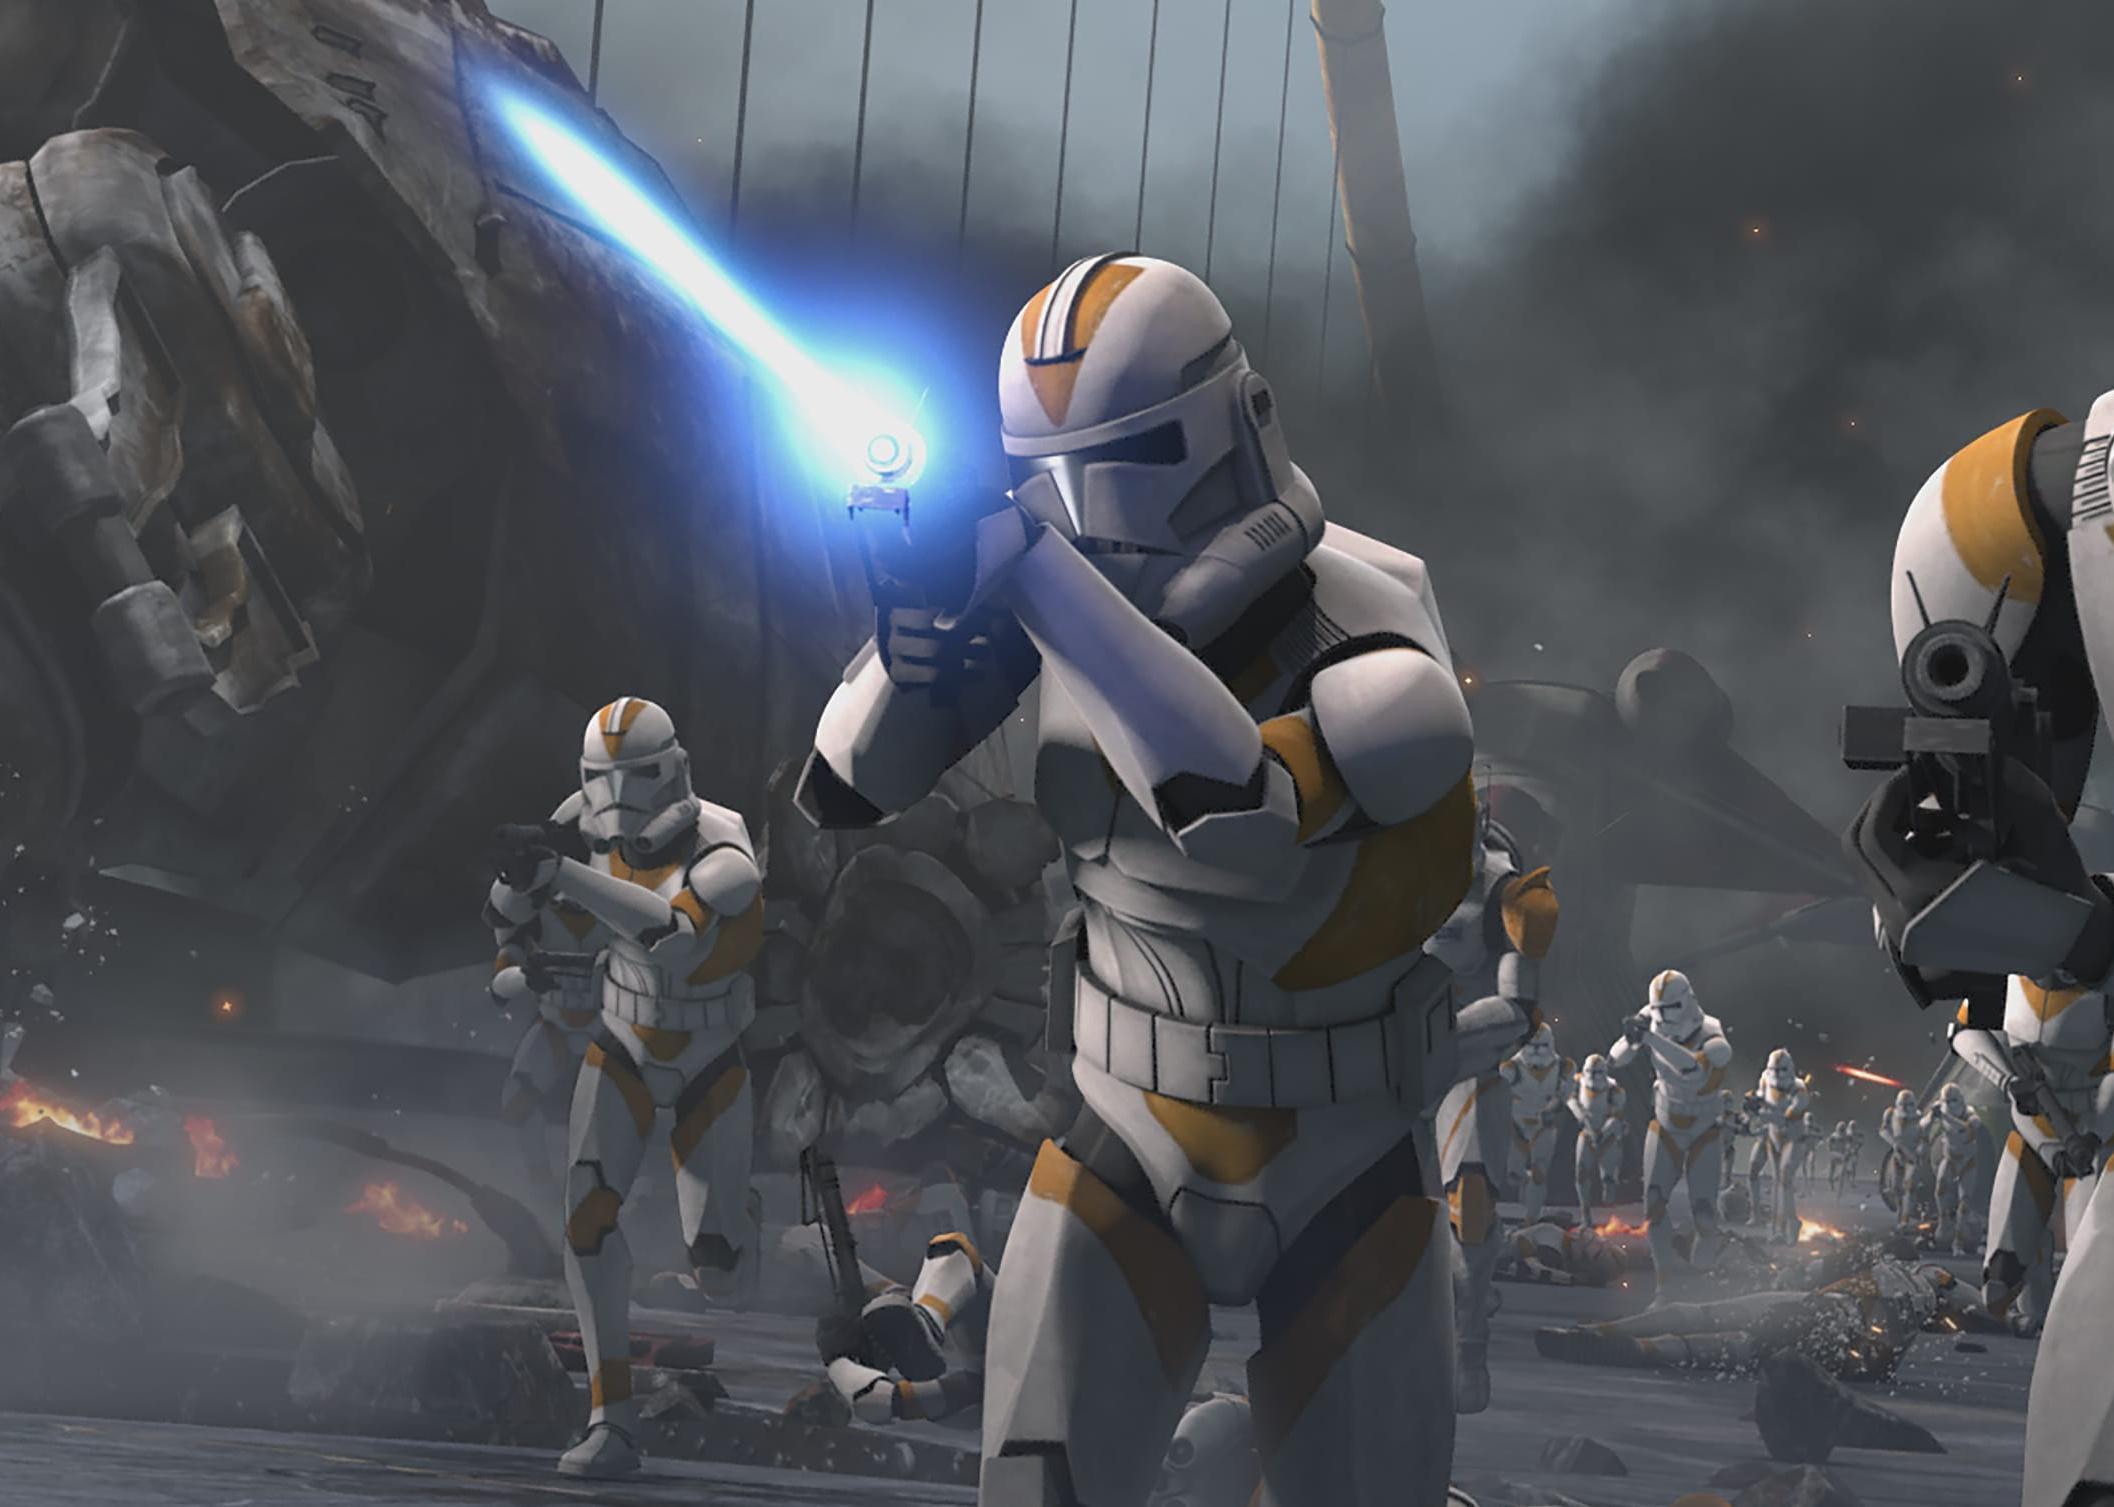 An animation of a group of storm troopers running and firing weapons.